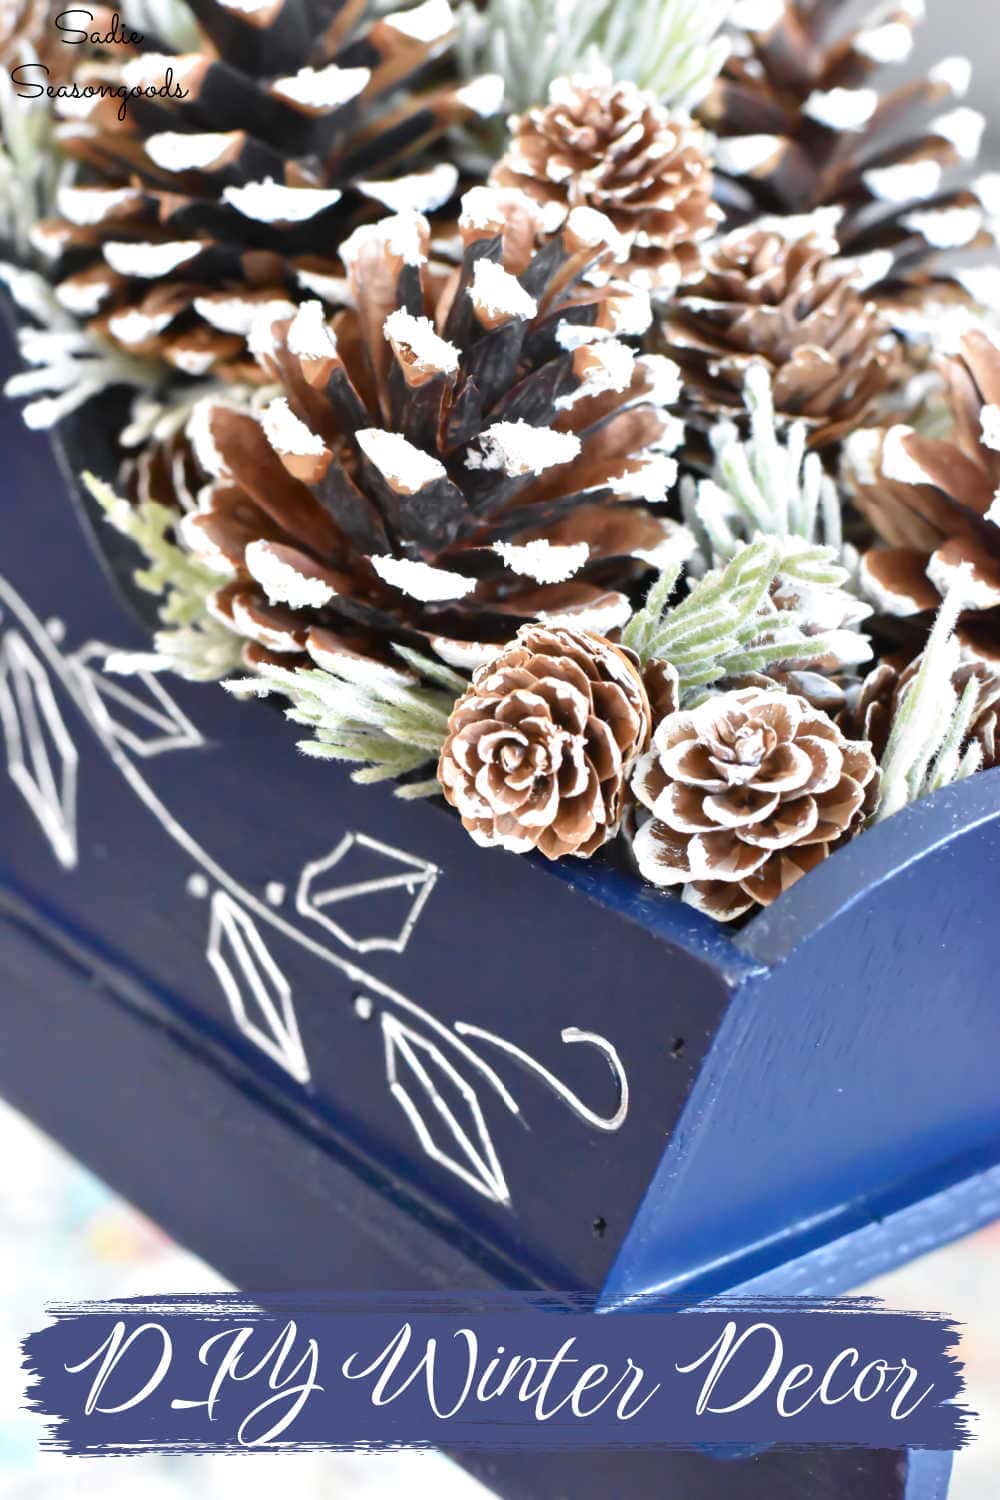 snow-covered pine cones and winter greenery for winter decor